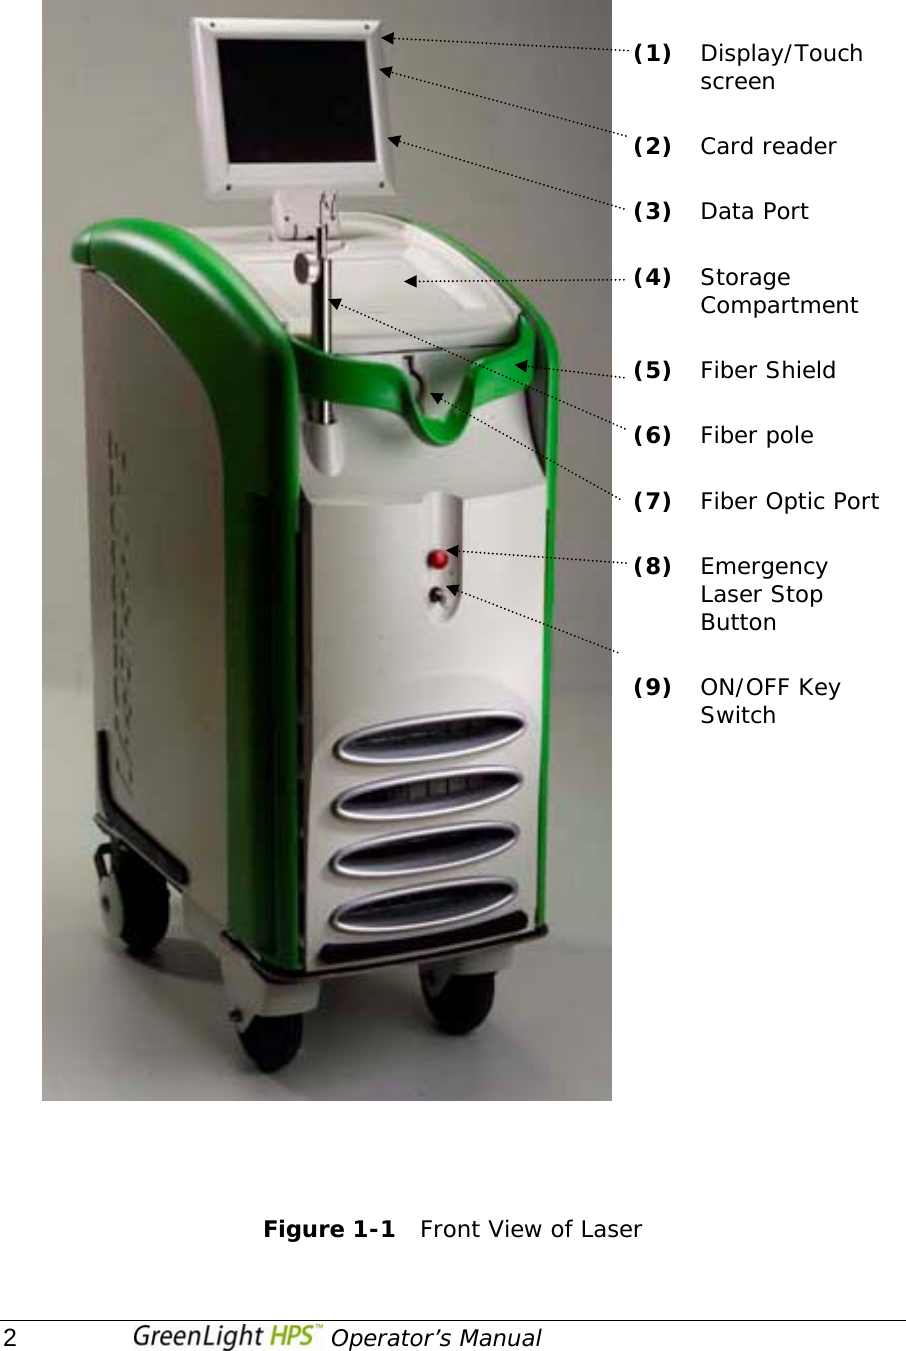  2                                       Operator’s Manual (1) Display/Touch screen (2) Card reader (3) Data Port (4) Storage Compartment (5) Fiber Shield (6) Fiber pole (7) Fiber Optic Port (8) Emergency Laser Stop Button (9) ON/OFF Key Switch      Figure 1-1   Front View of Laser    